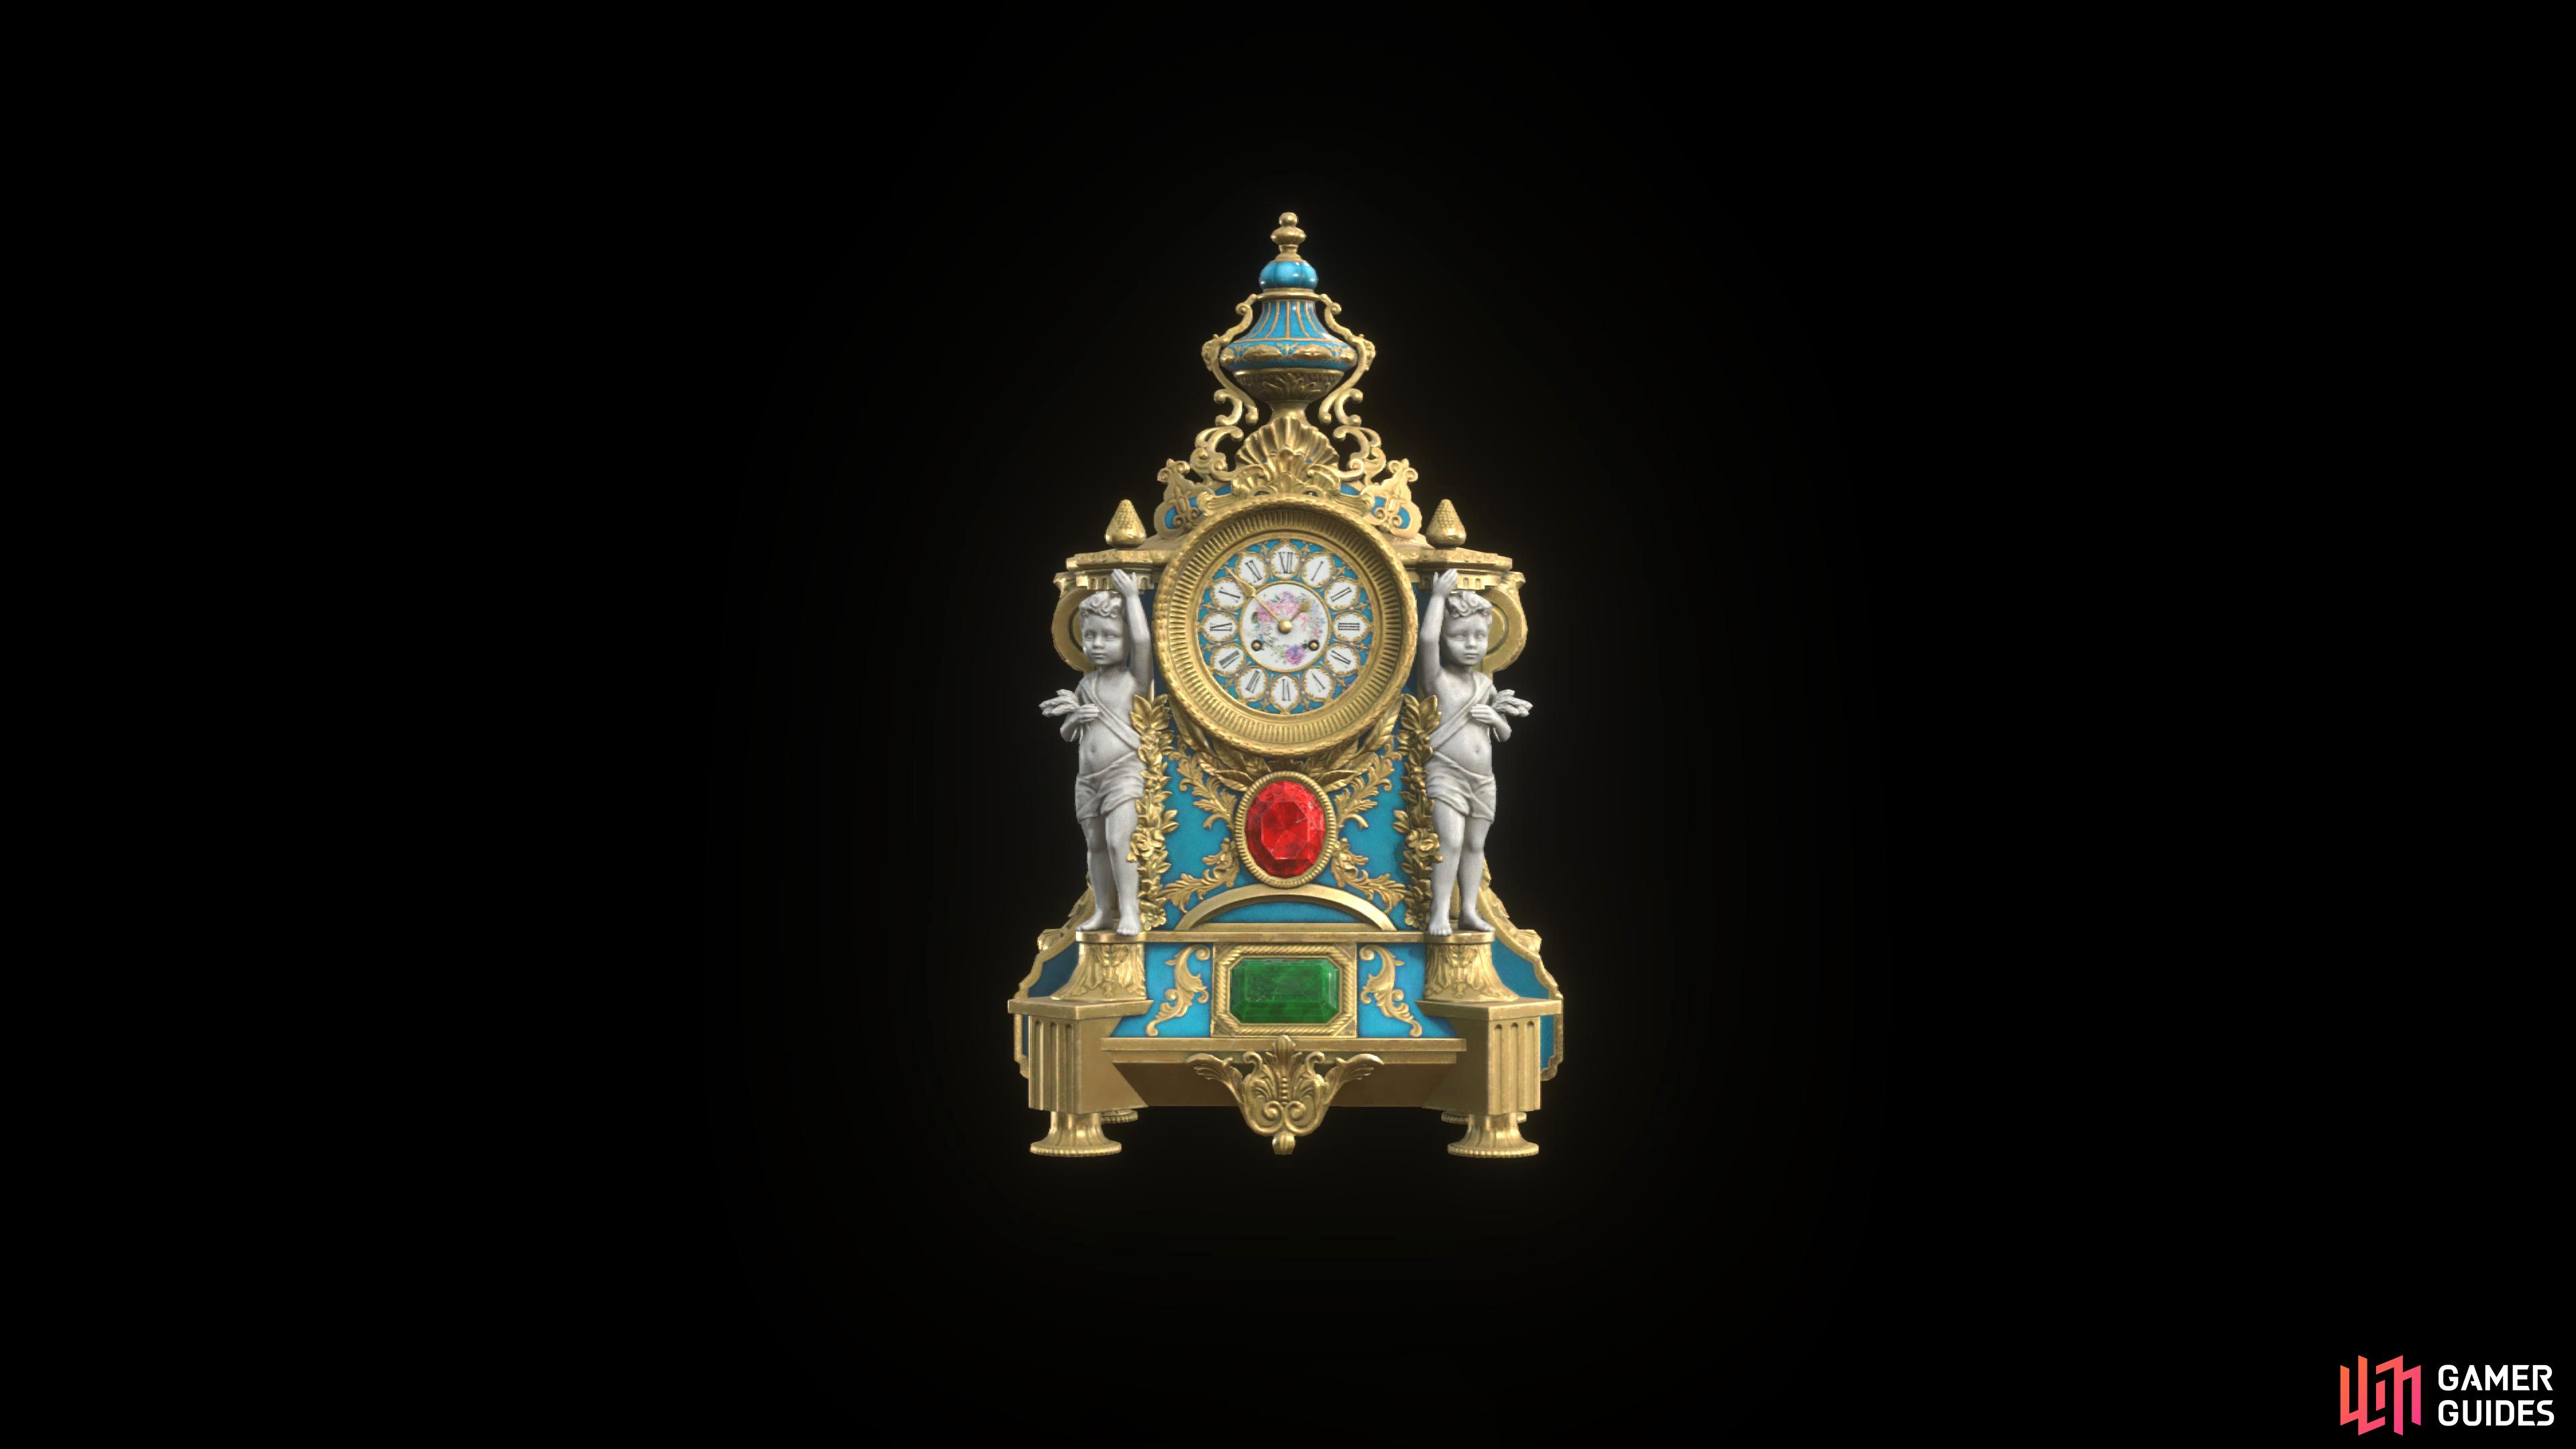 The Extravagant Clock has two slots. One Rectangle, one Oval.